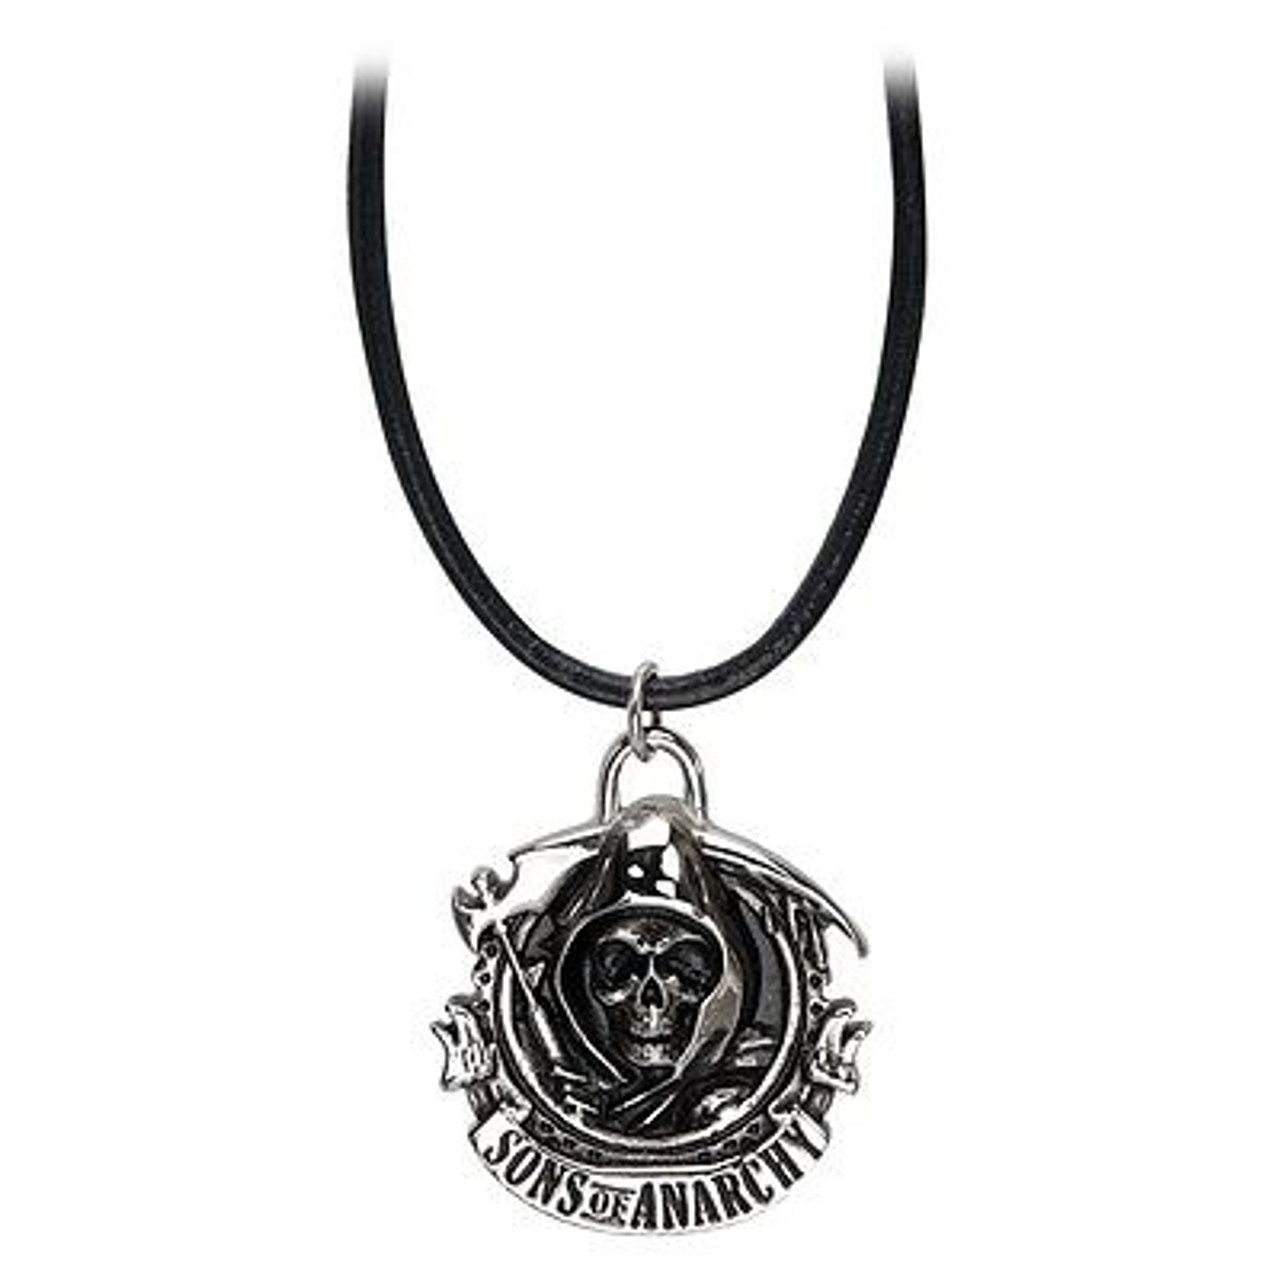 Authentic Sons Of Anarchy Grim Reaper Stainless Pendant Cord Soa Samcro Biker